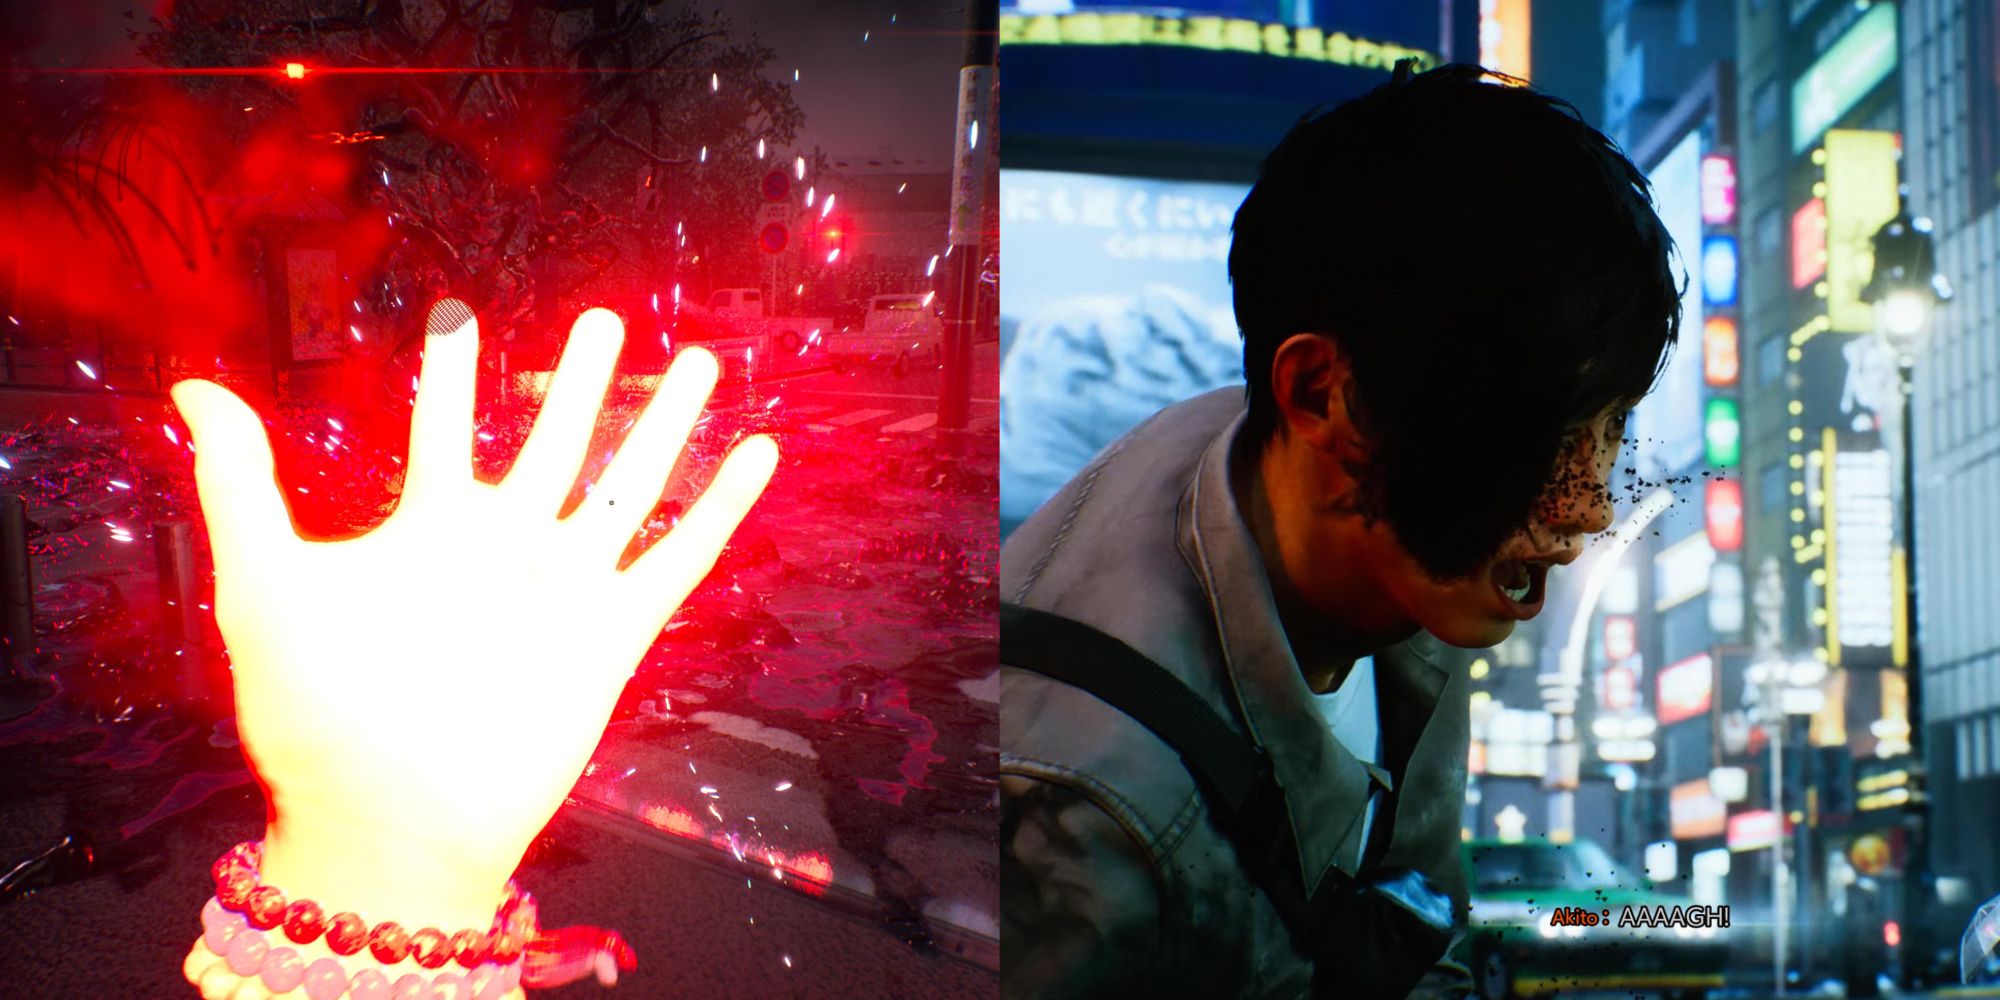 A collage showing Prayer Beads and a red glowing hand on the left, and the protagonist screaming on the right.